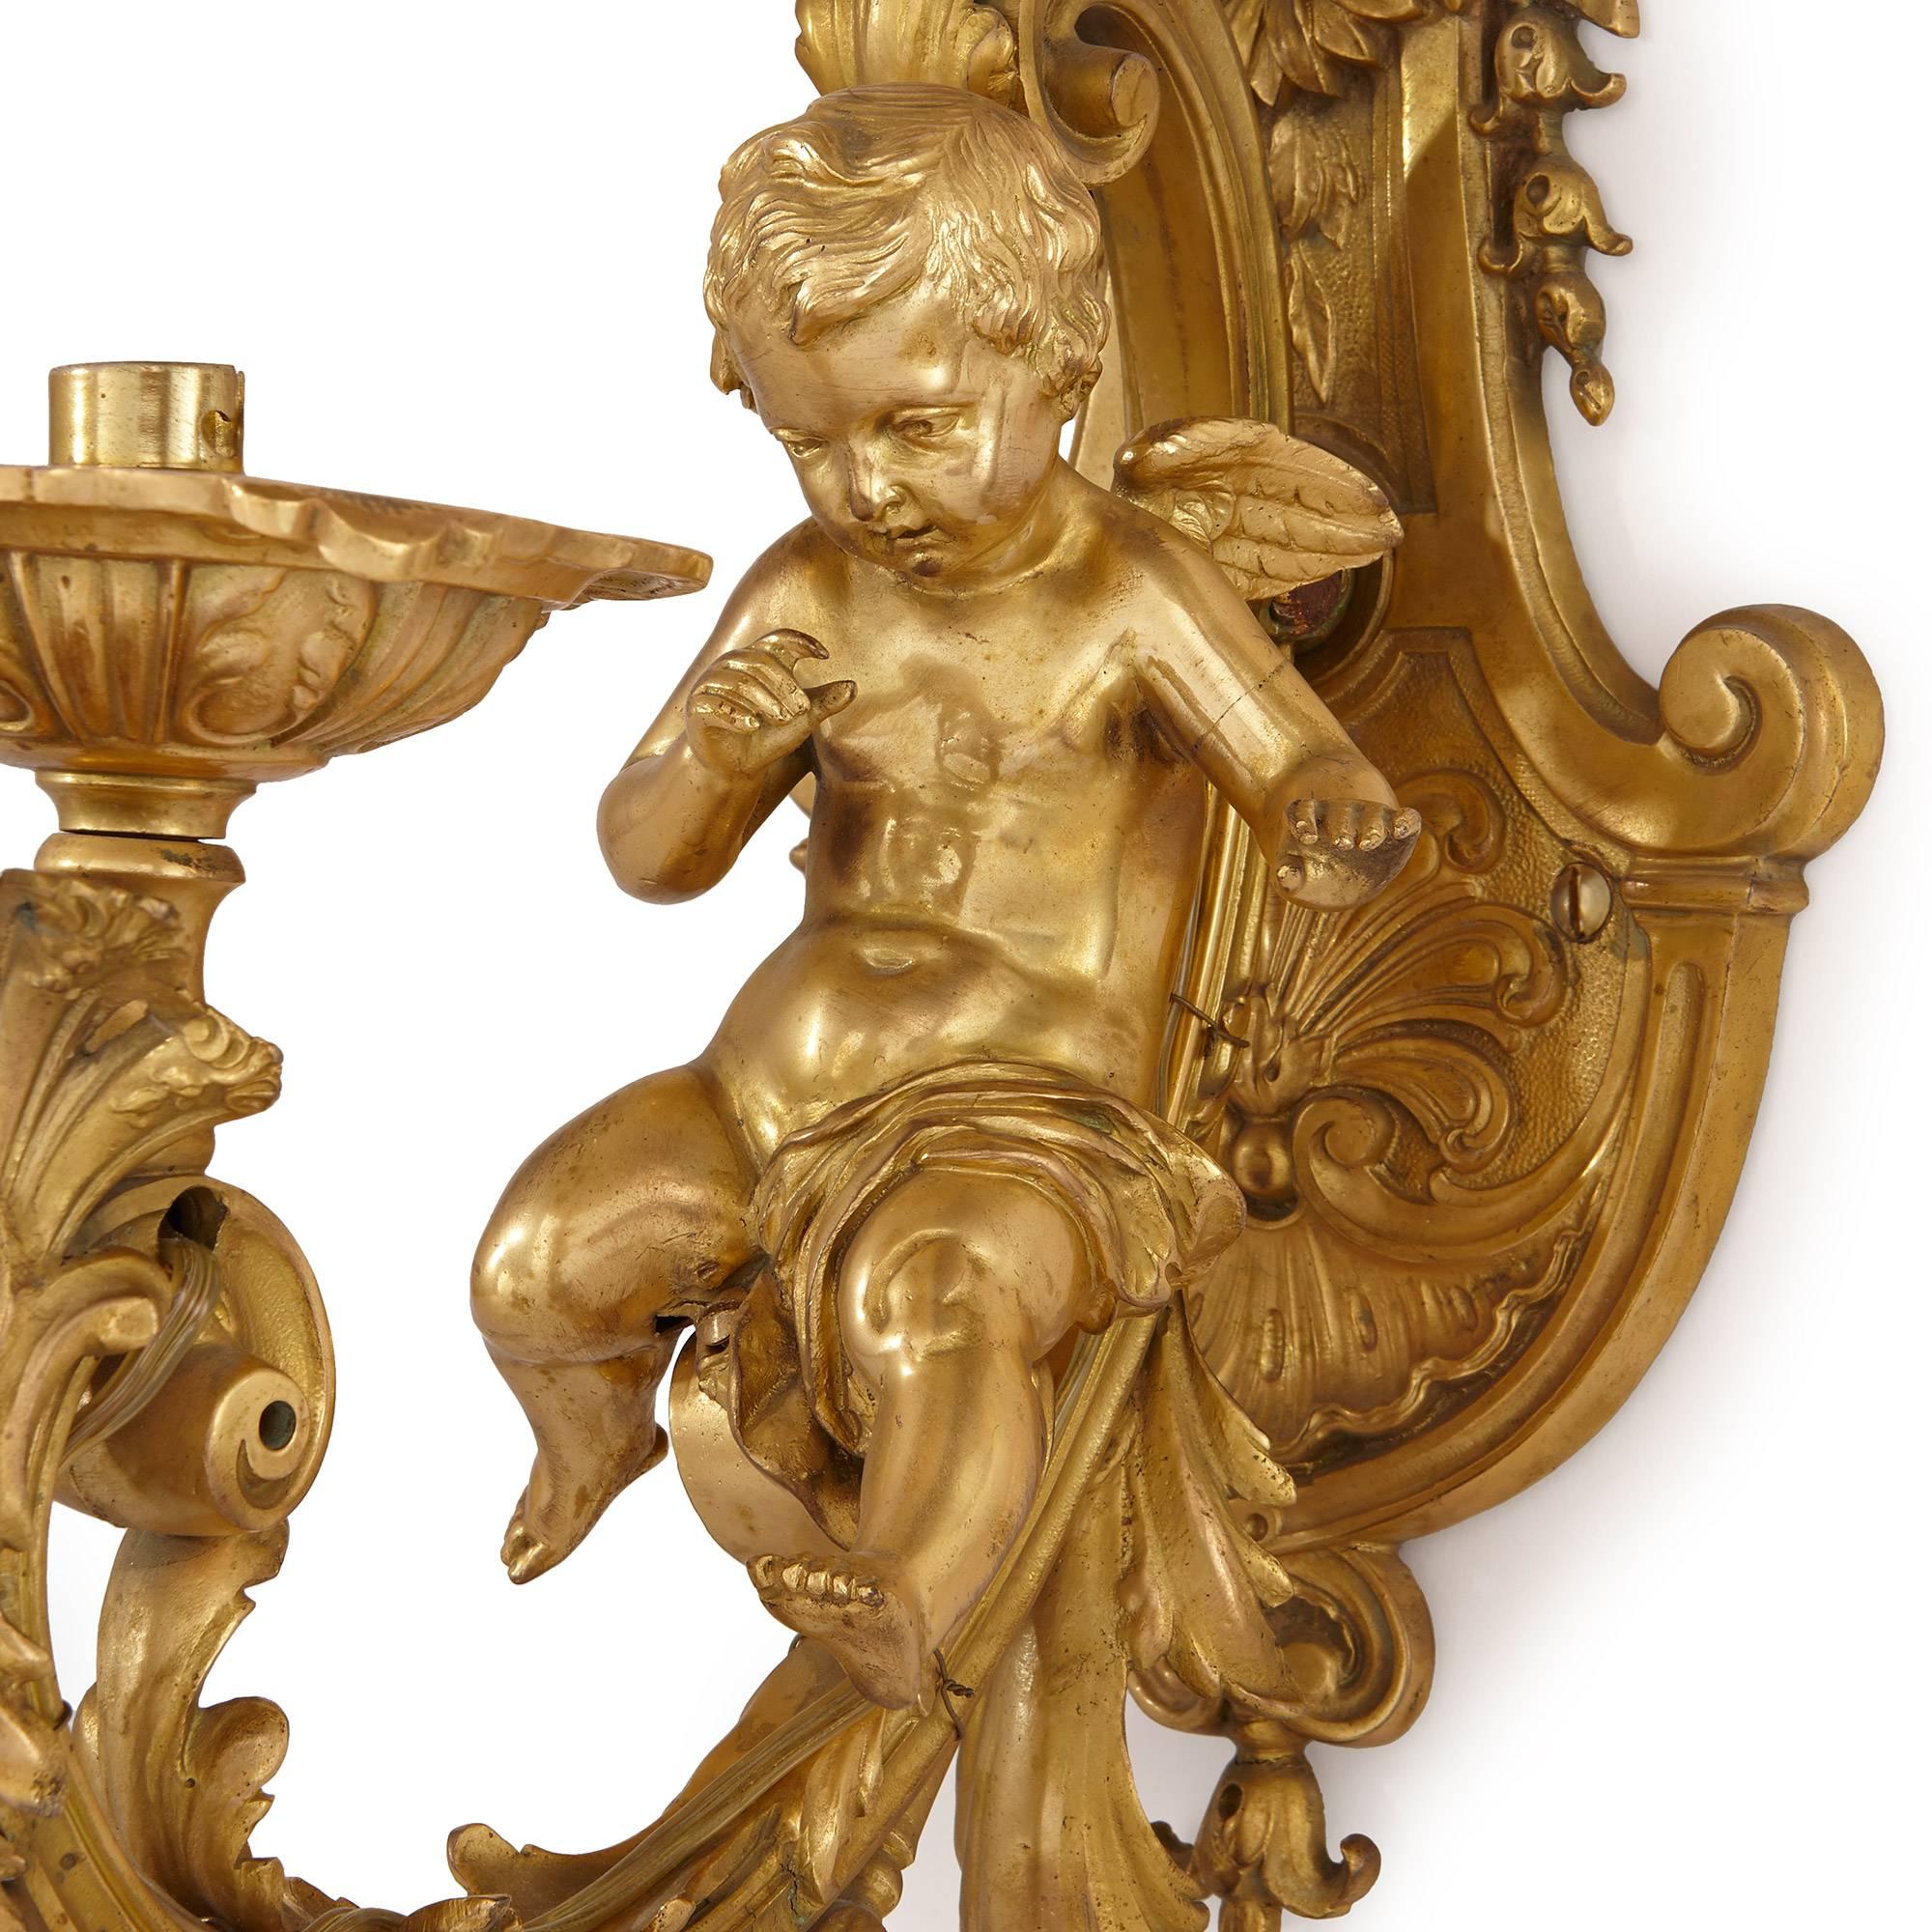 Each with a curved back plate topped with a vase of flowers, a seated putto in front, upon a C-scroll arm ending in a faceted rounded drip plate, mounted in ormolu and heavily adorned with acanthus foliage, floral and scallop edged motifs, signed